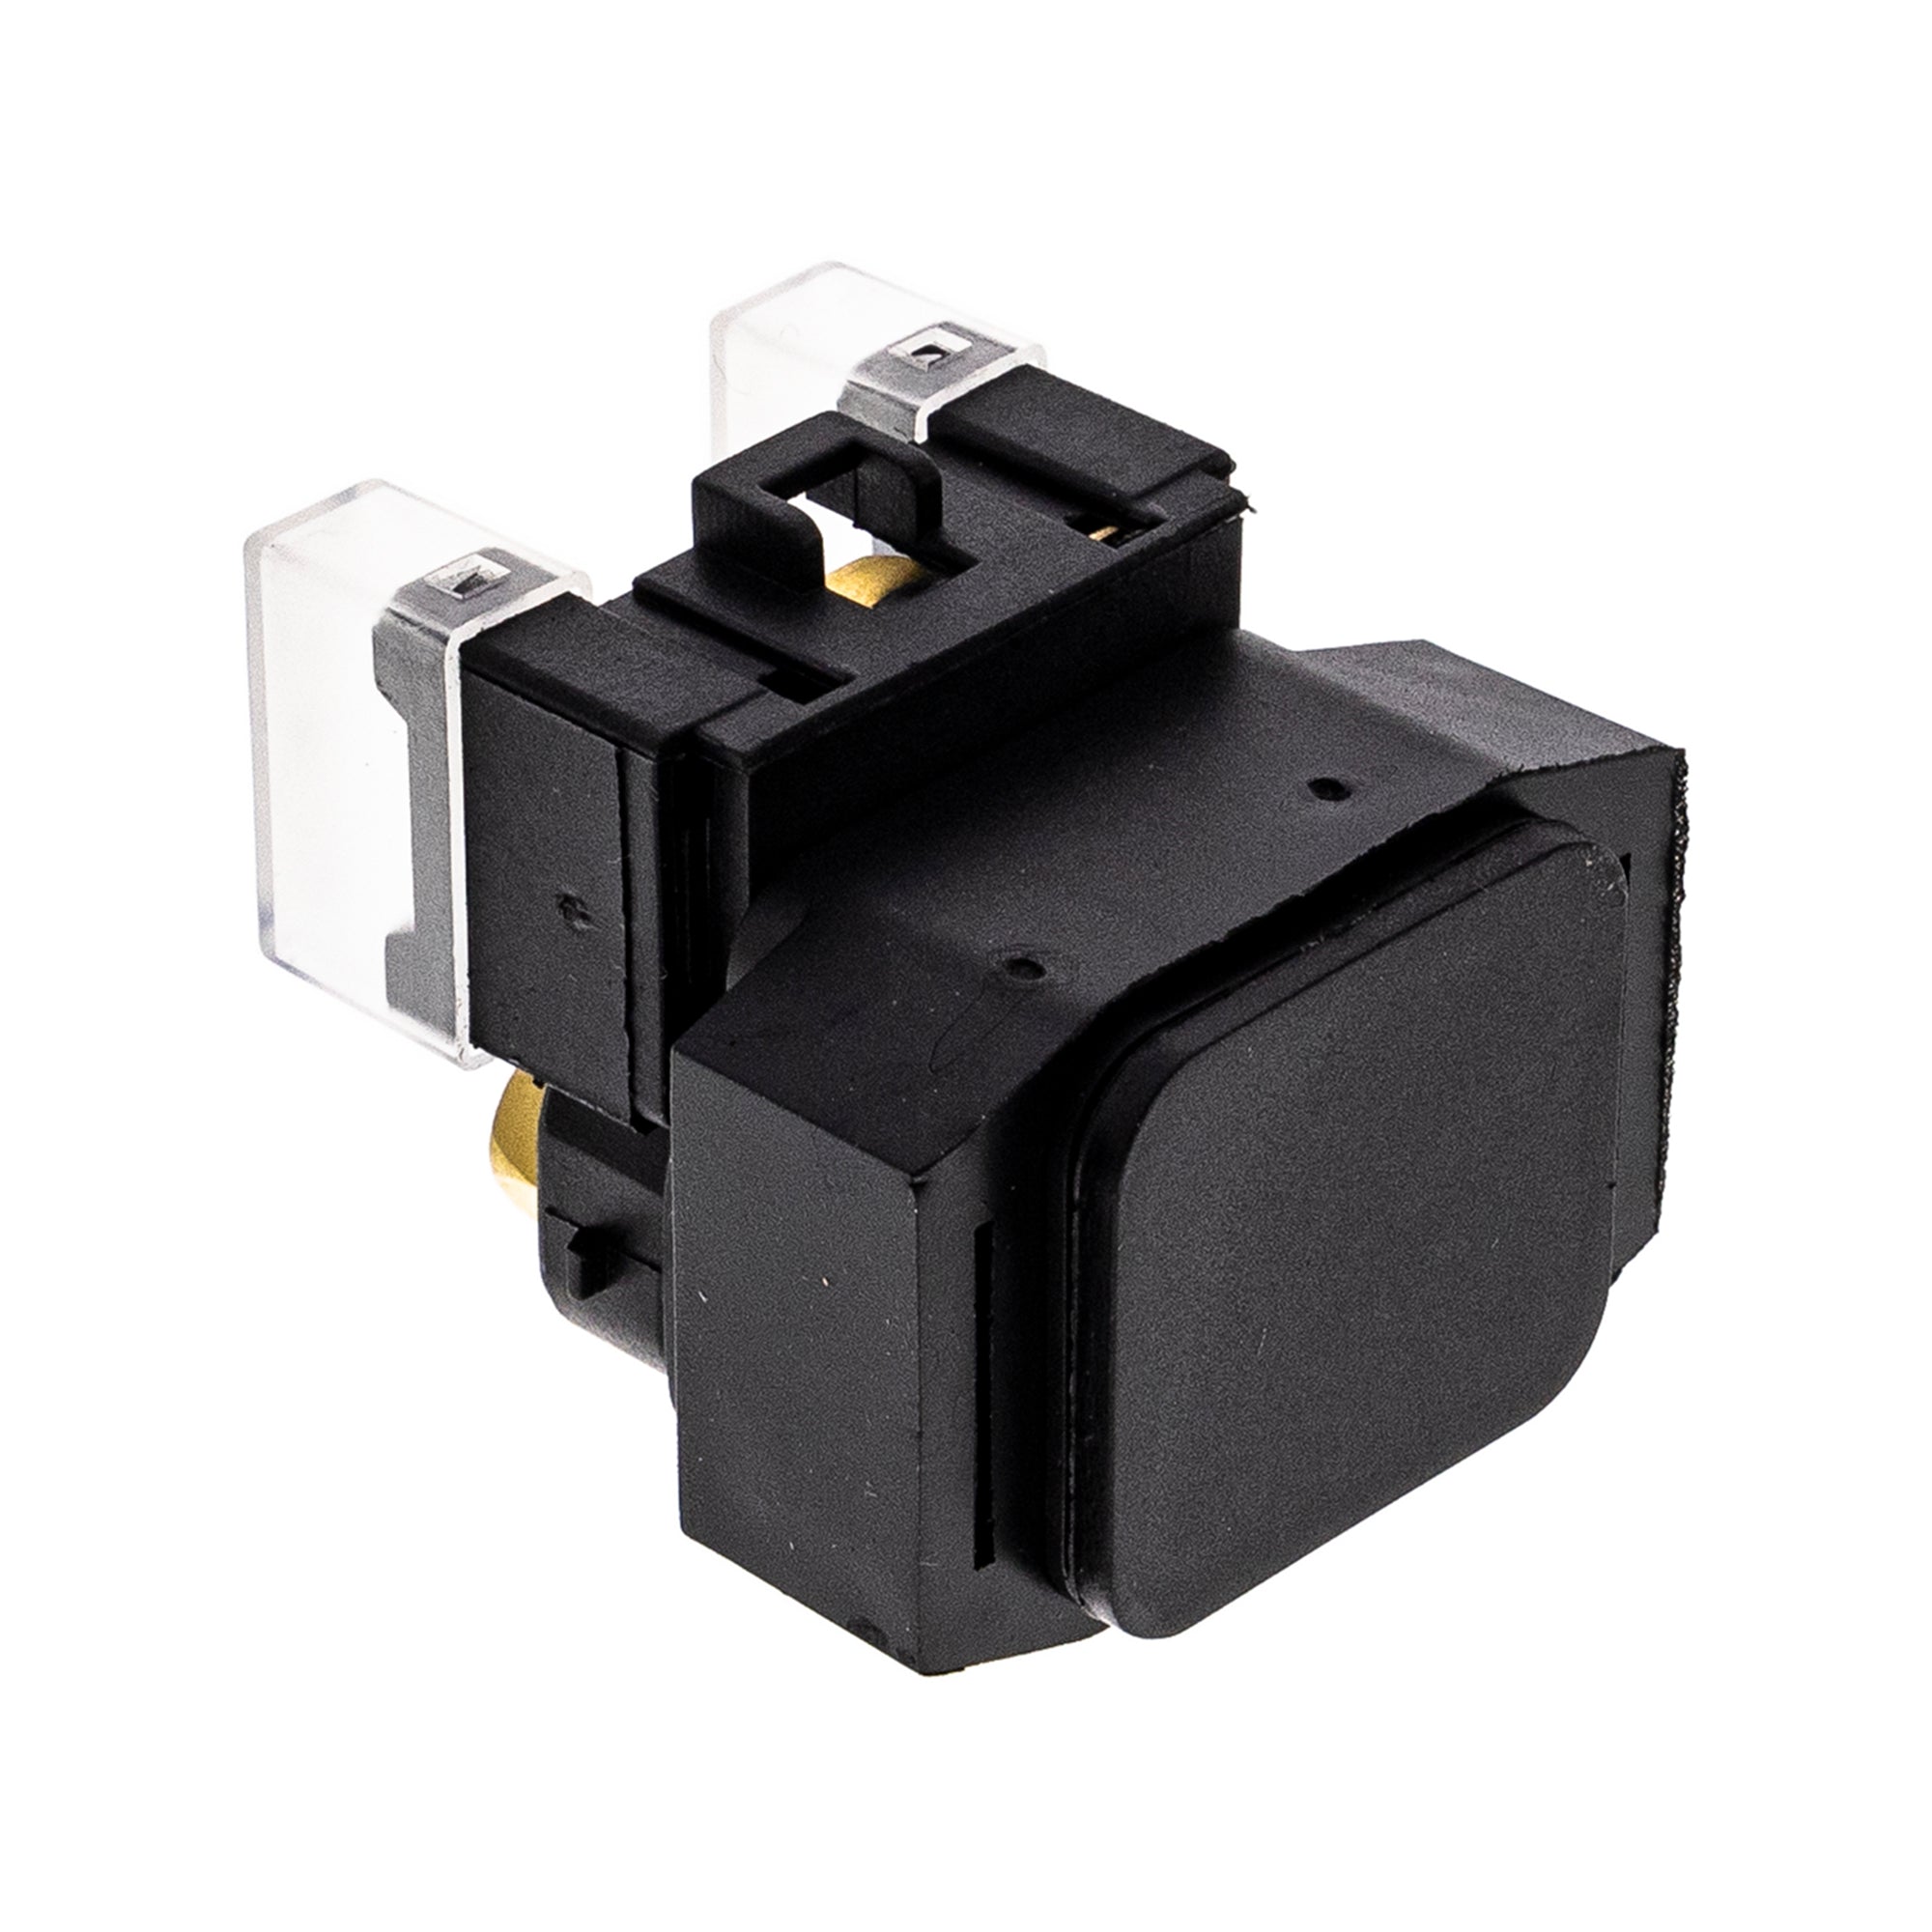 Starter Solenoid Relay Switch 519-CSS2224L For Yamaha 5HH-81940-02-00 5HH-81940-01-00